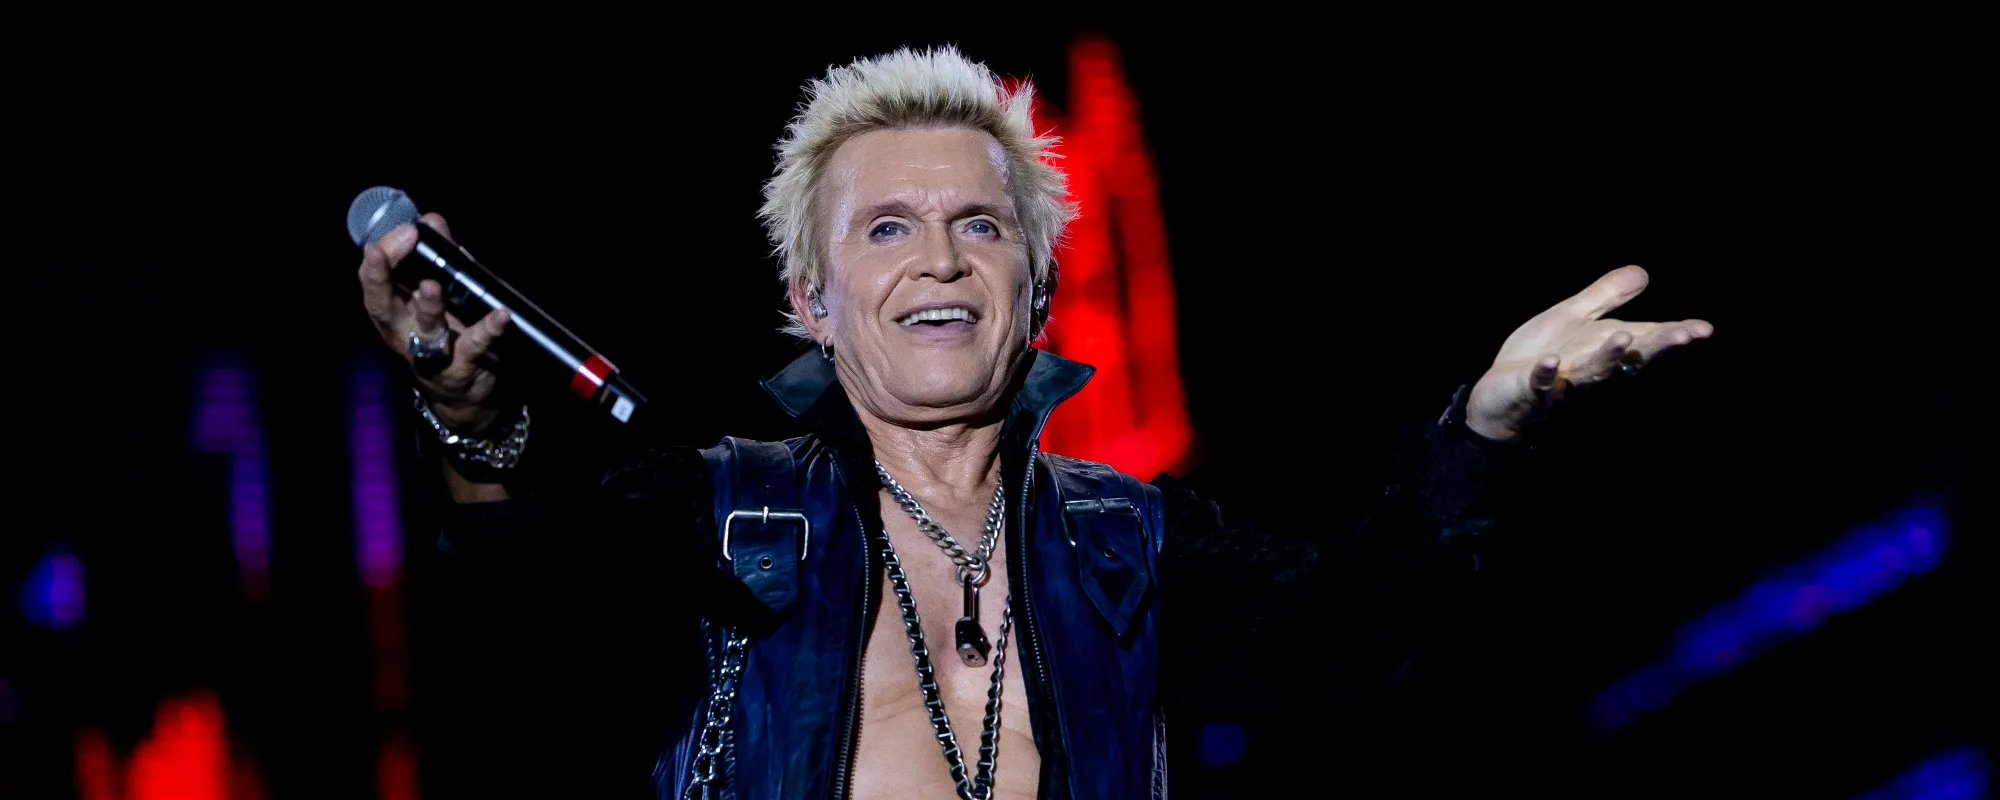 8 Diverse Deep Cuts from Billy Idol